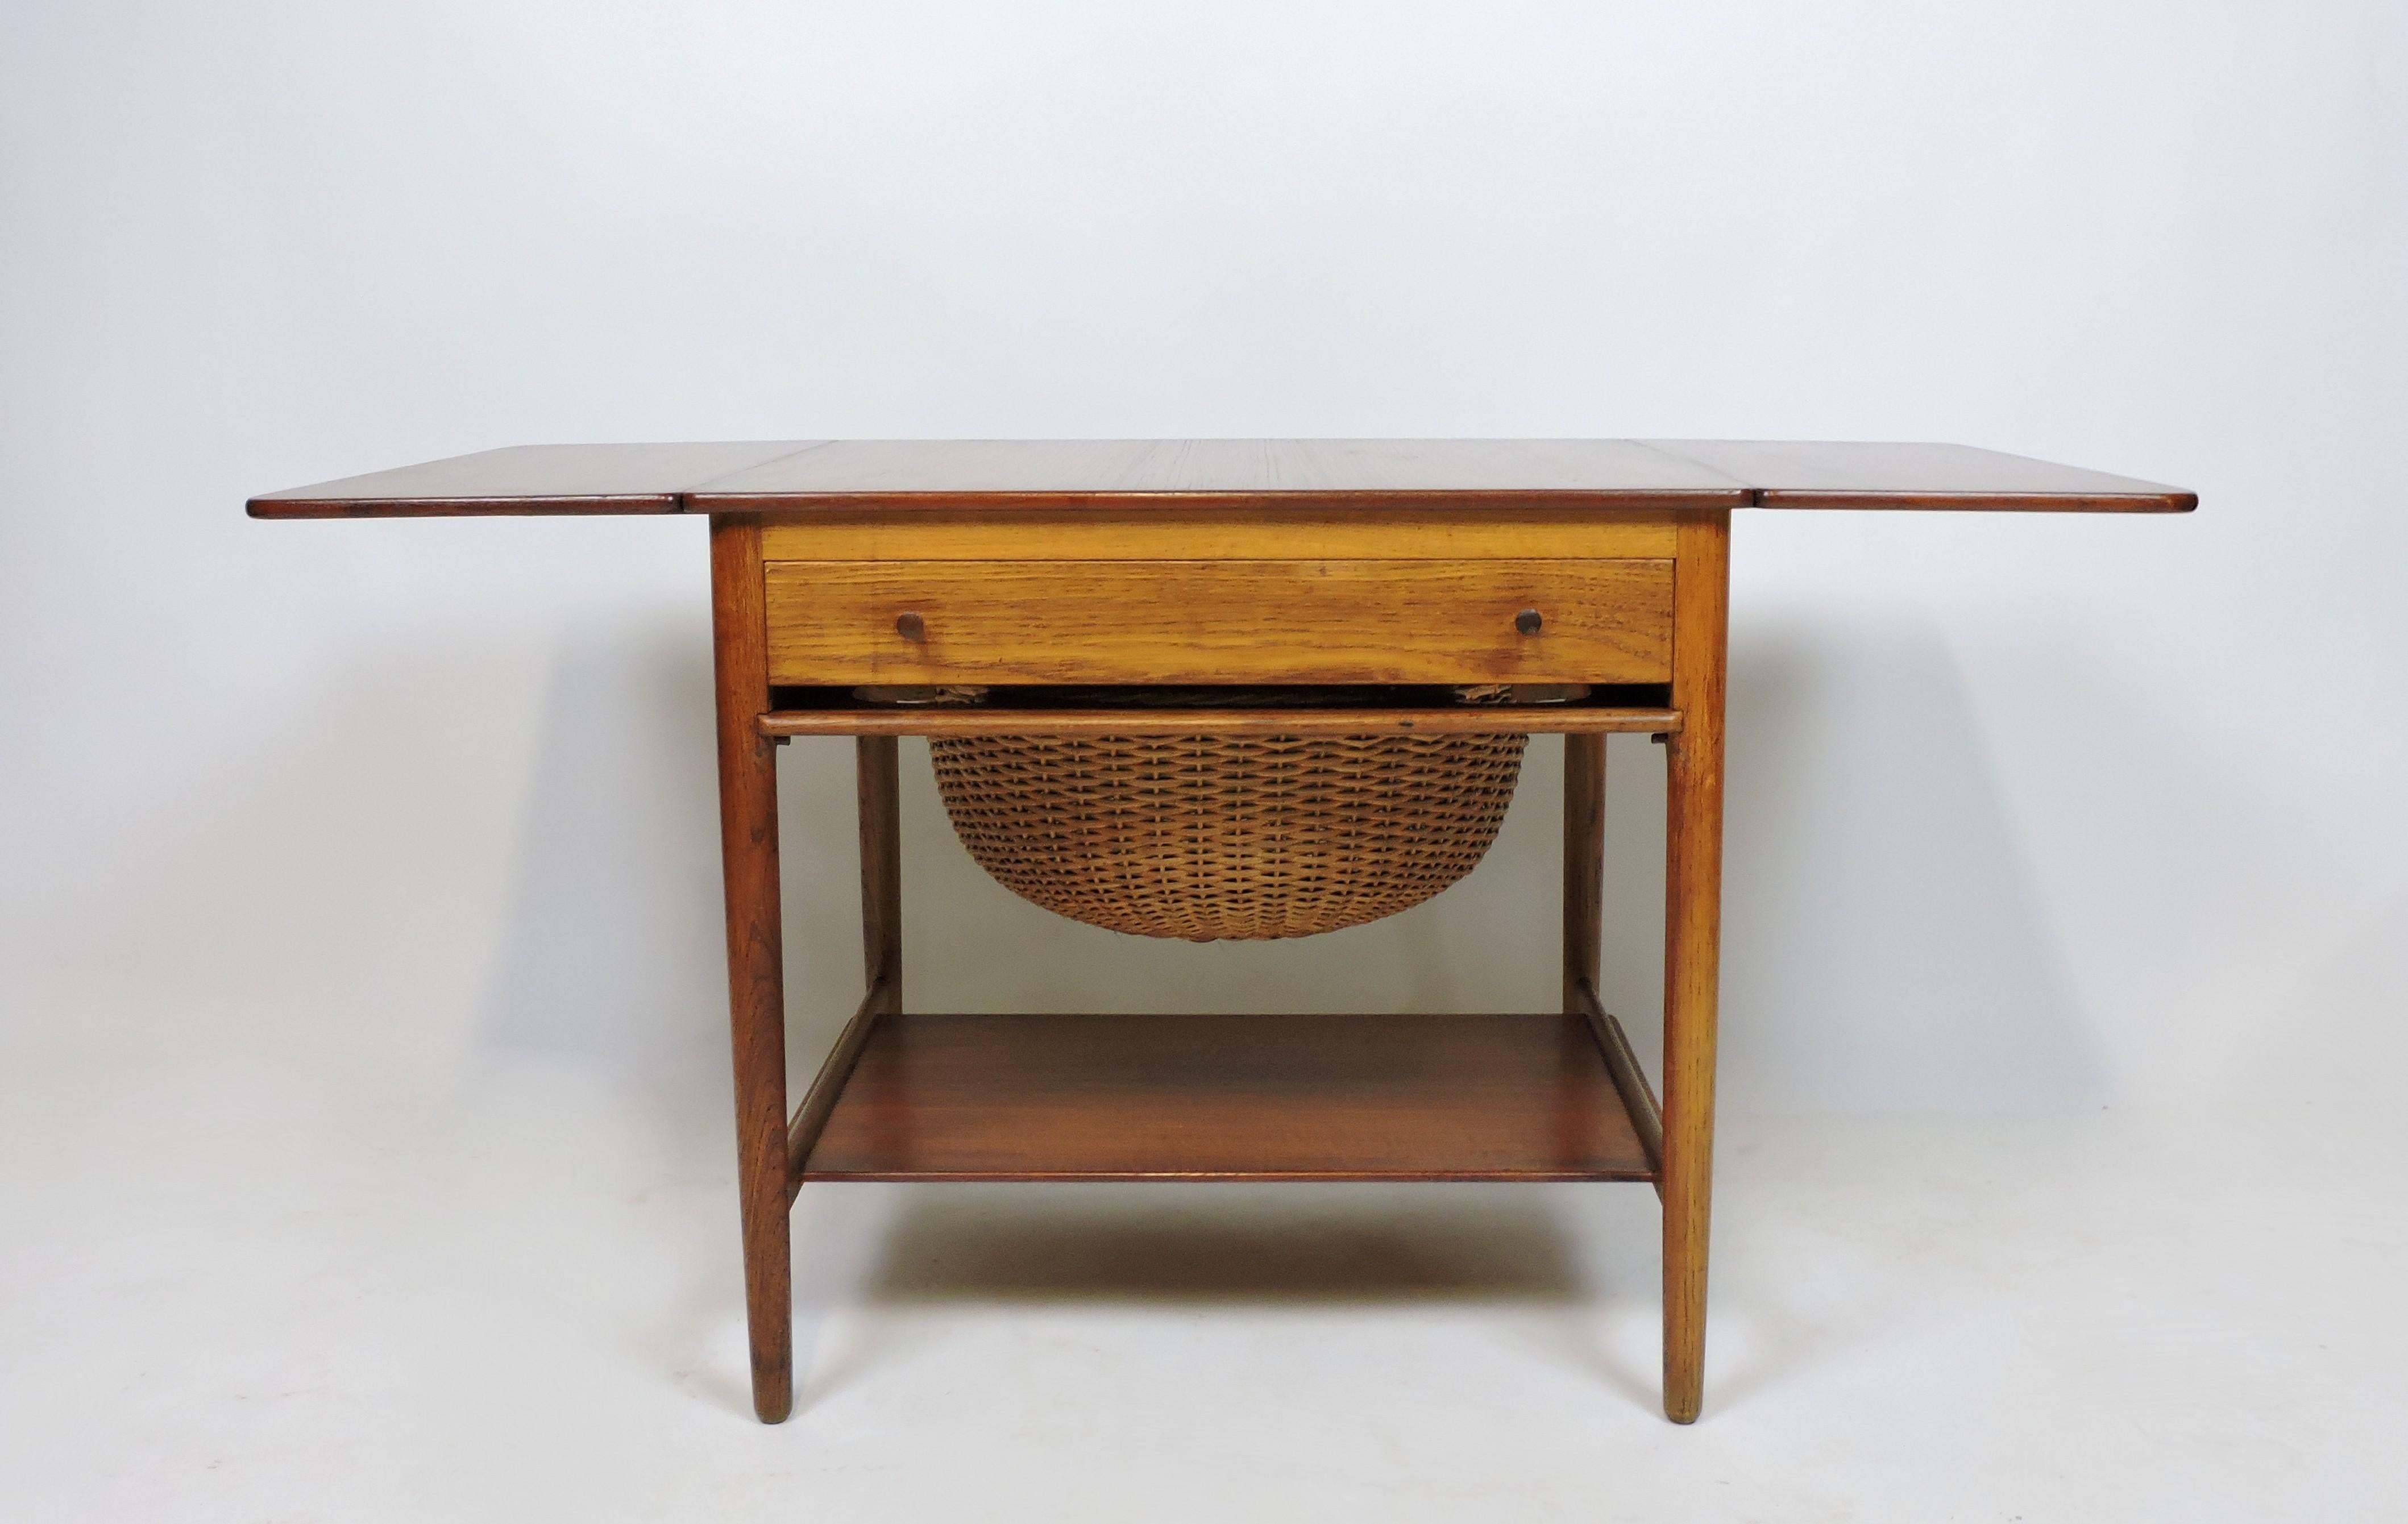 Beautifully crafted early example of model AT-33 sewing table designed by Hans Wegner and manufactured in Denmark by cabinet maker, Andreas Tuck. This teak and oak table has two extendable side leaves, a drawer with compartments for sewing